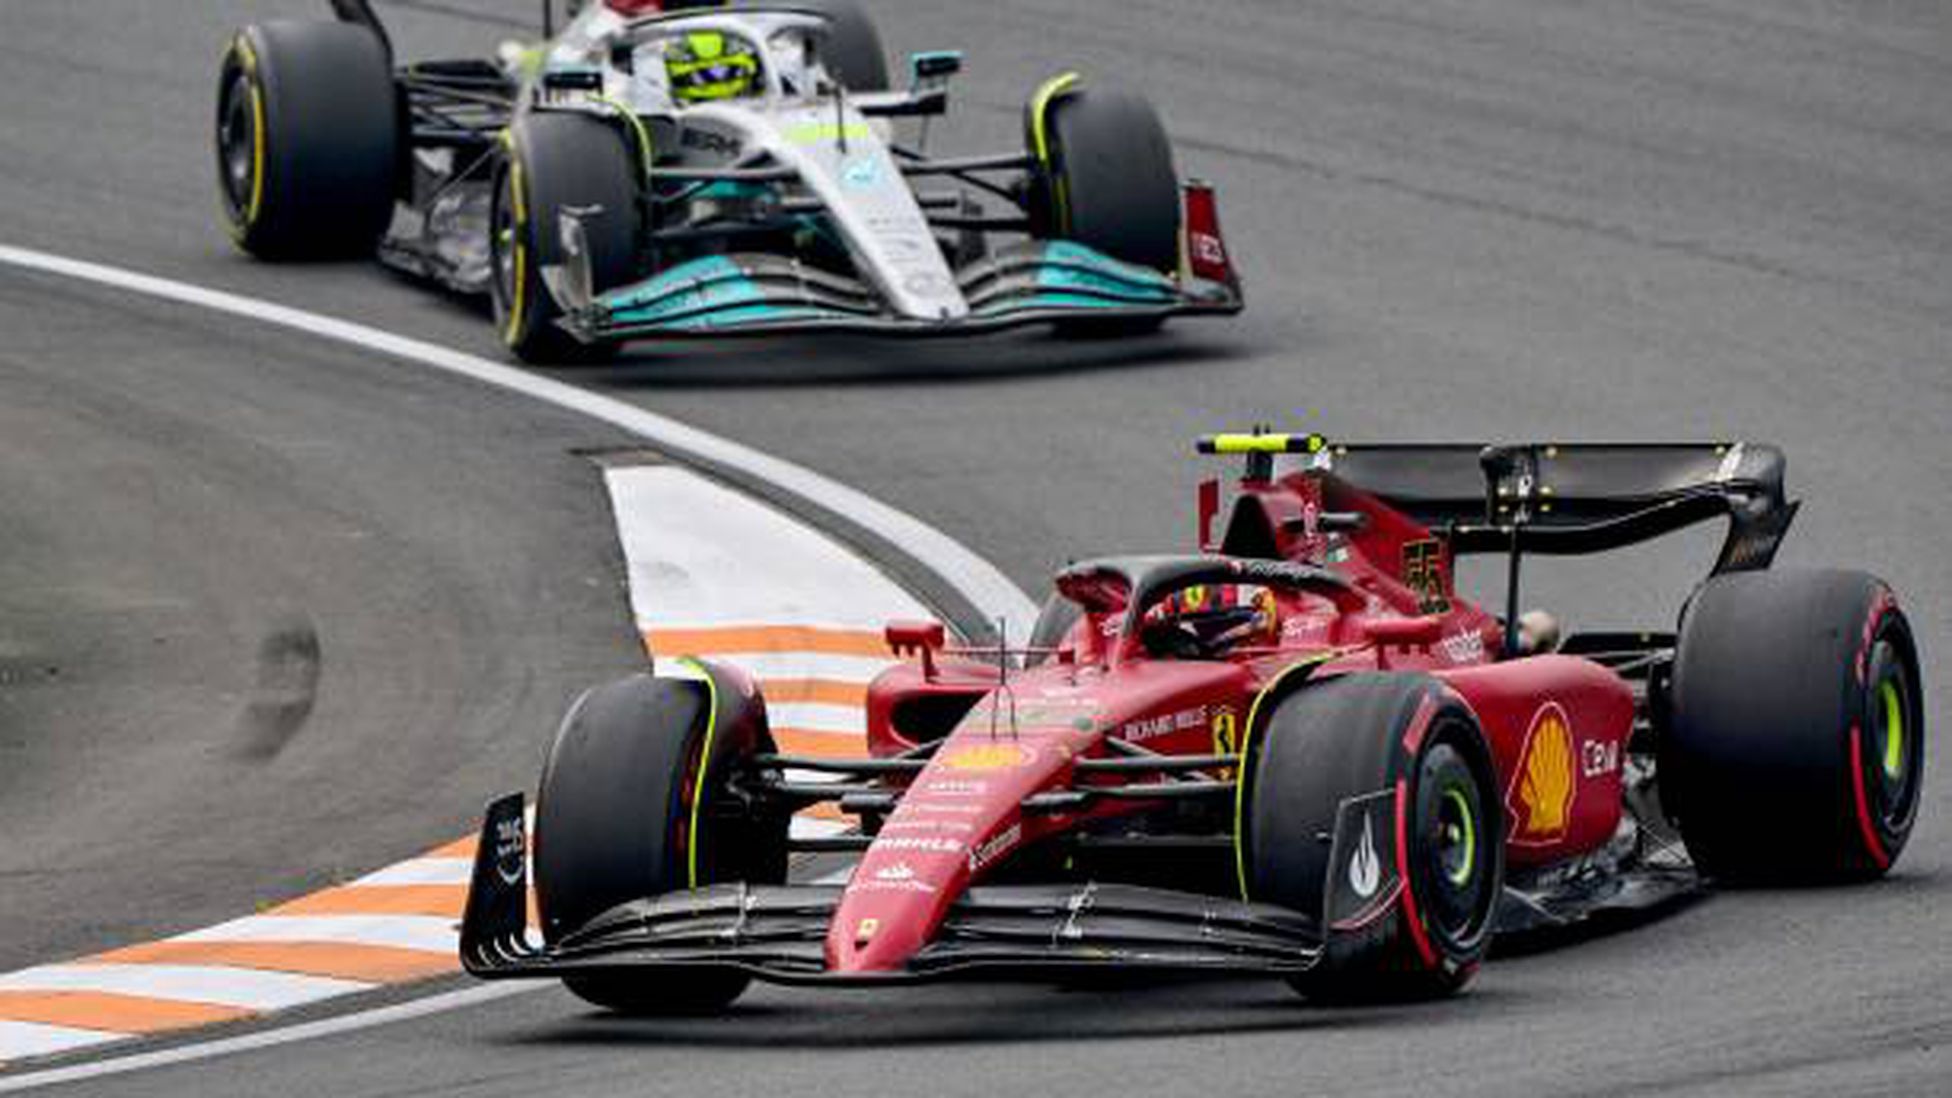 ITALIAN GP F1 2022: LIVE TV AND LIVE-STREAMING TIMETABLE OF THE MONZA GRAND PRIX